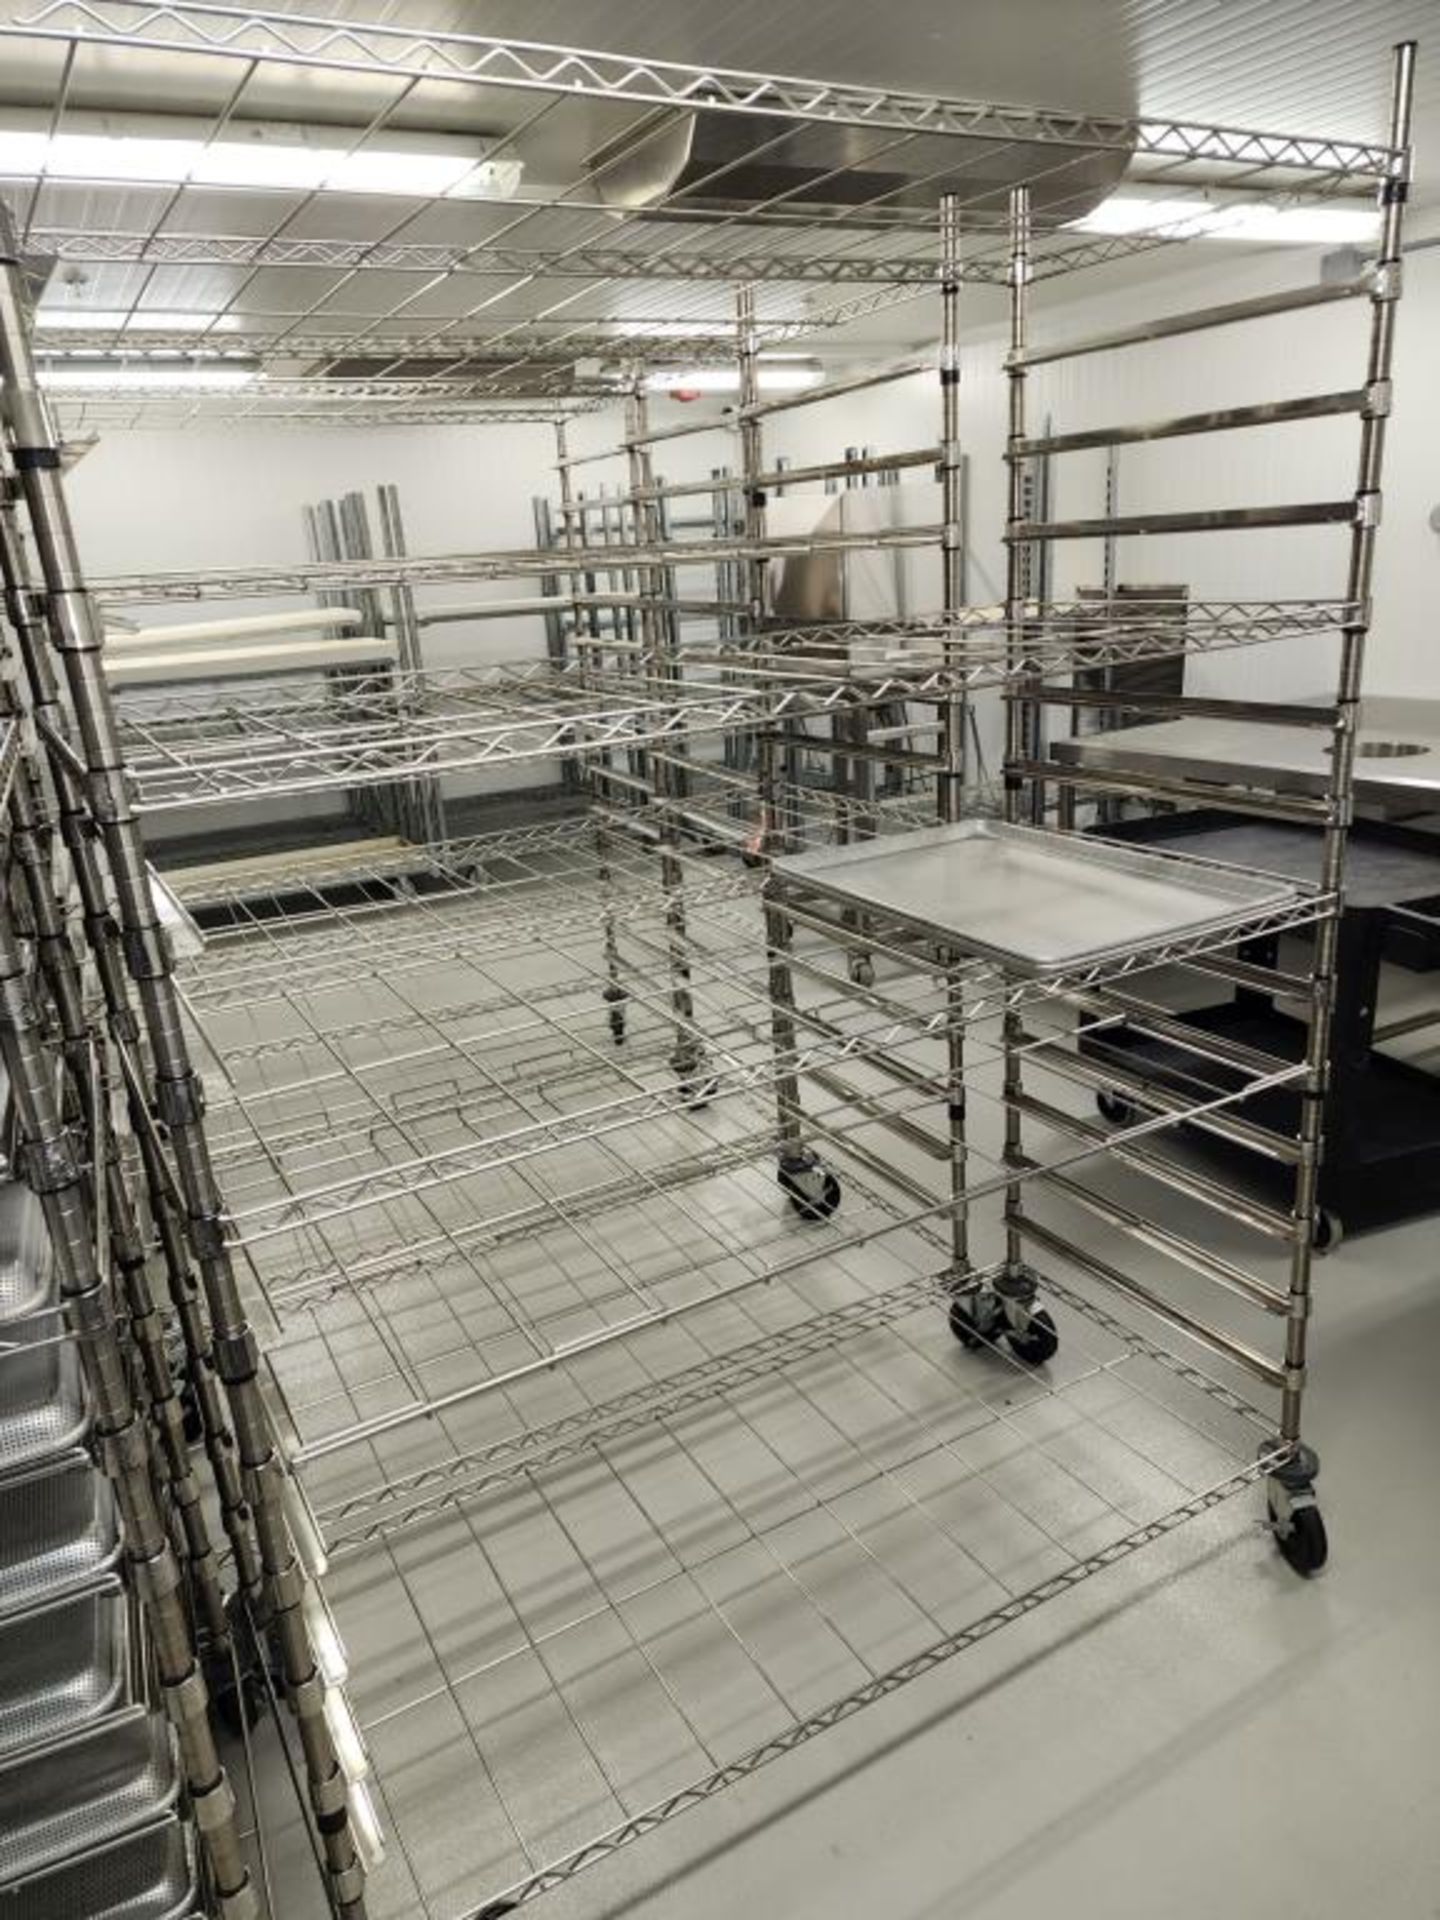 Drying Carts and Trays - Image 6 of 12